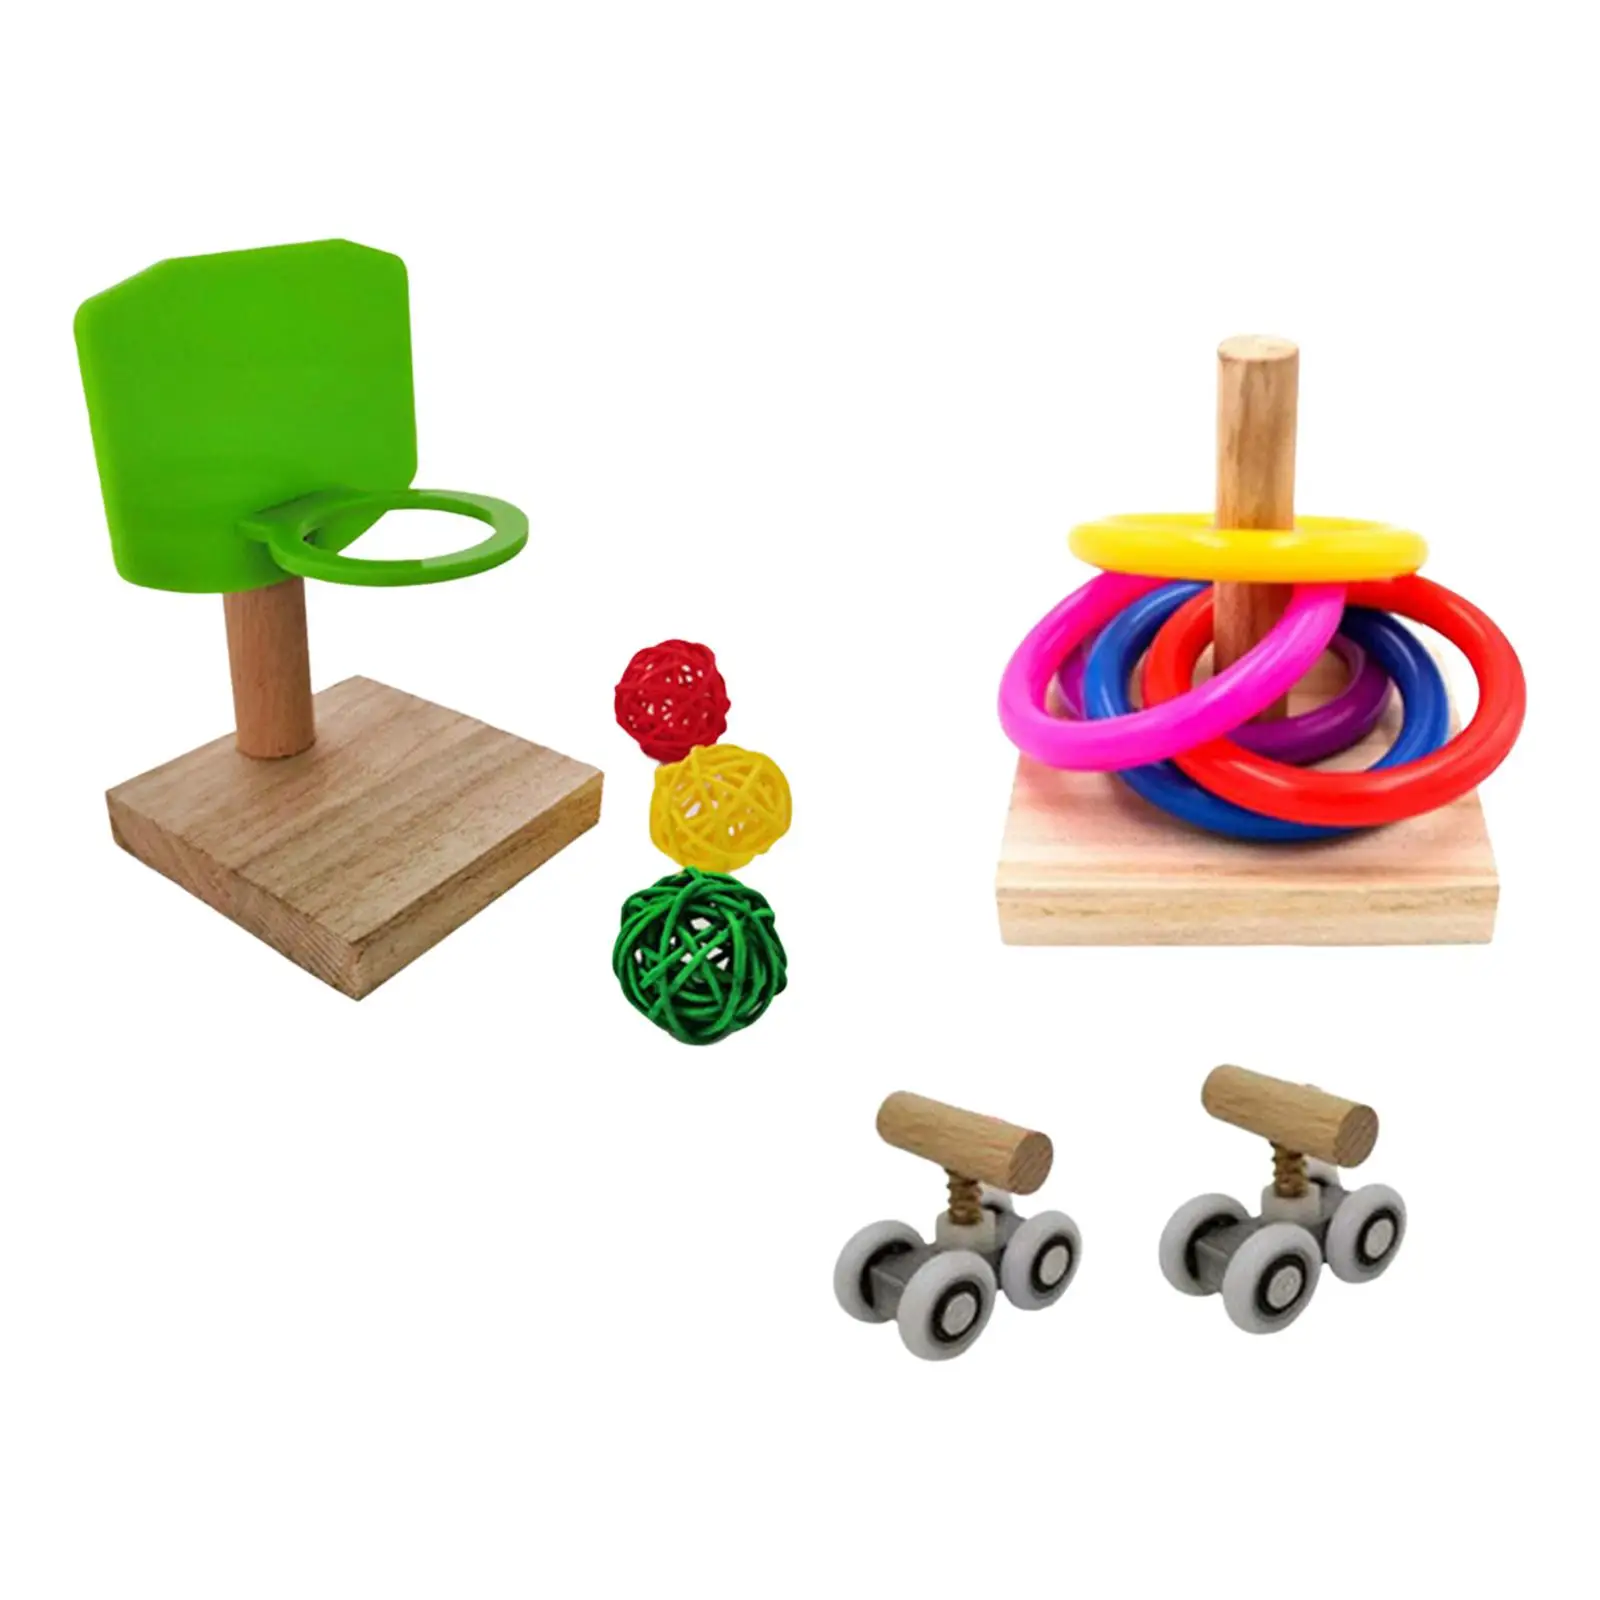 Parrot Toys Set of 3 Types Stacking Rings Parrot Intelligence Toy Roller Skates Perch Tearing Toy for Budgie Finches Conures